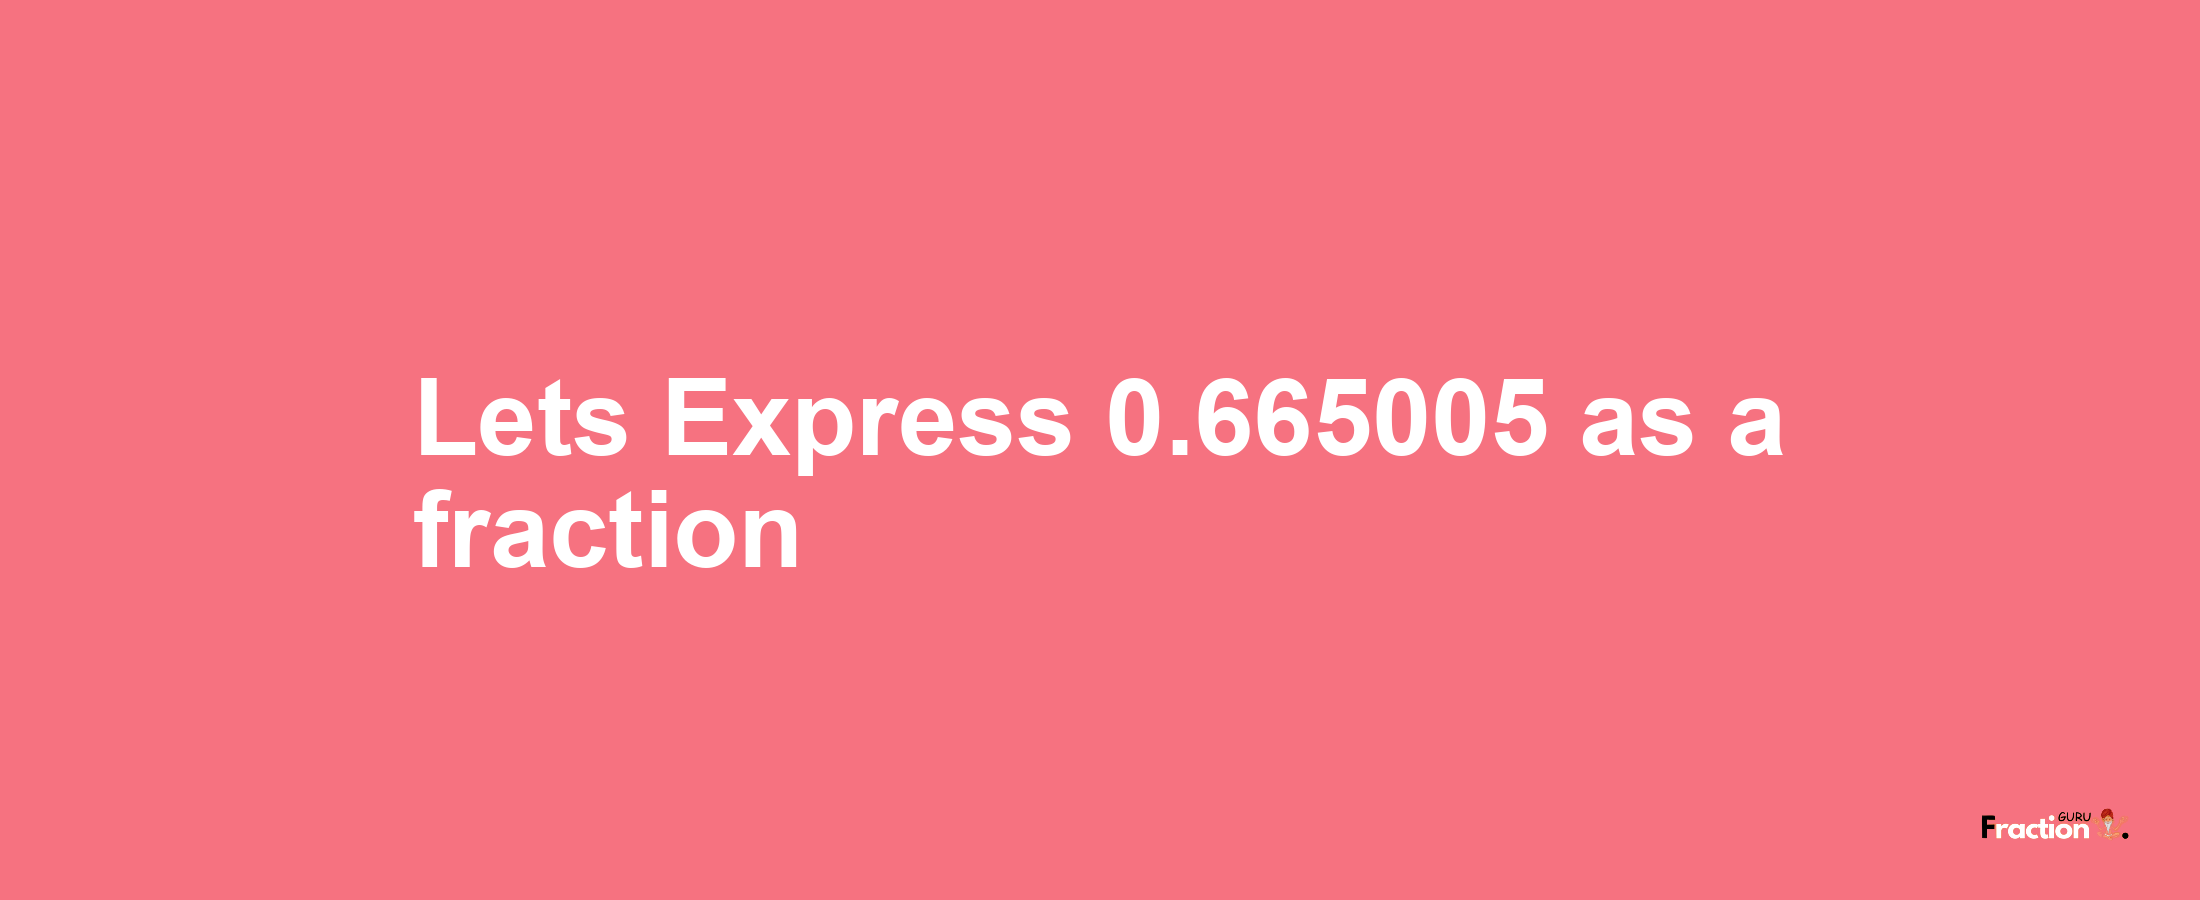 Lets Express 0.665005 as afraction